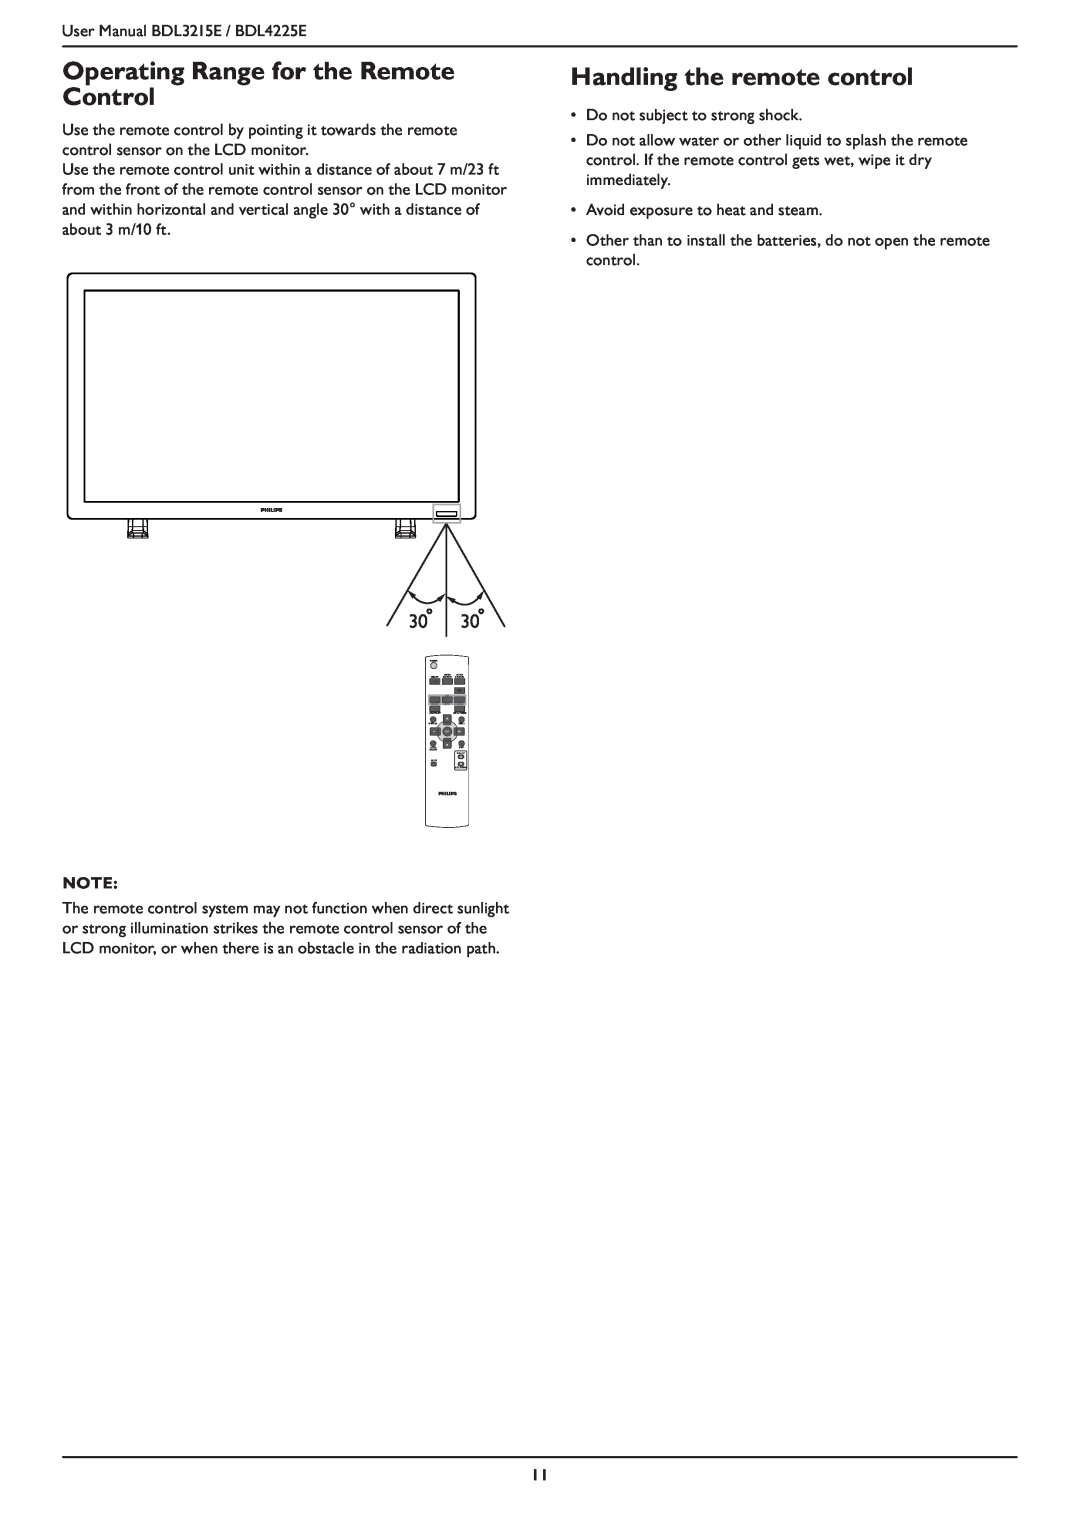 Philips BDL4225E, BDL3215E user manual Operating Range for the Remote Control, Handling the remote control 